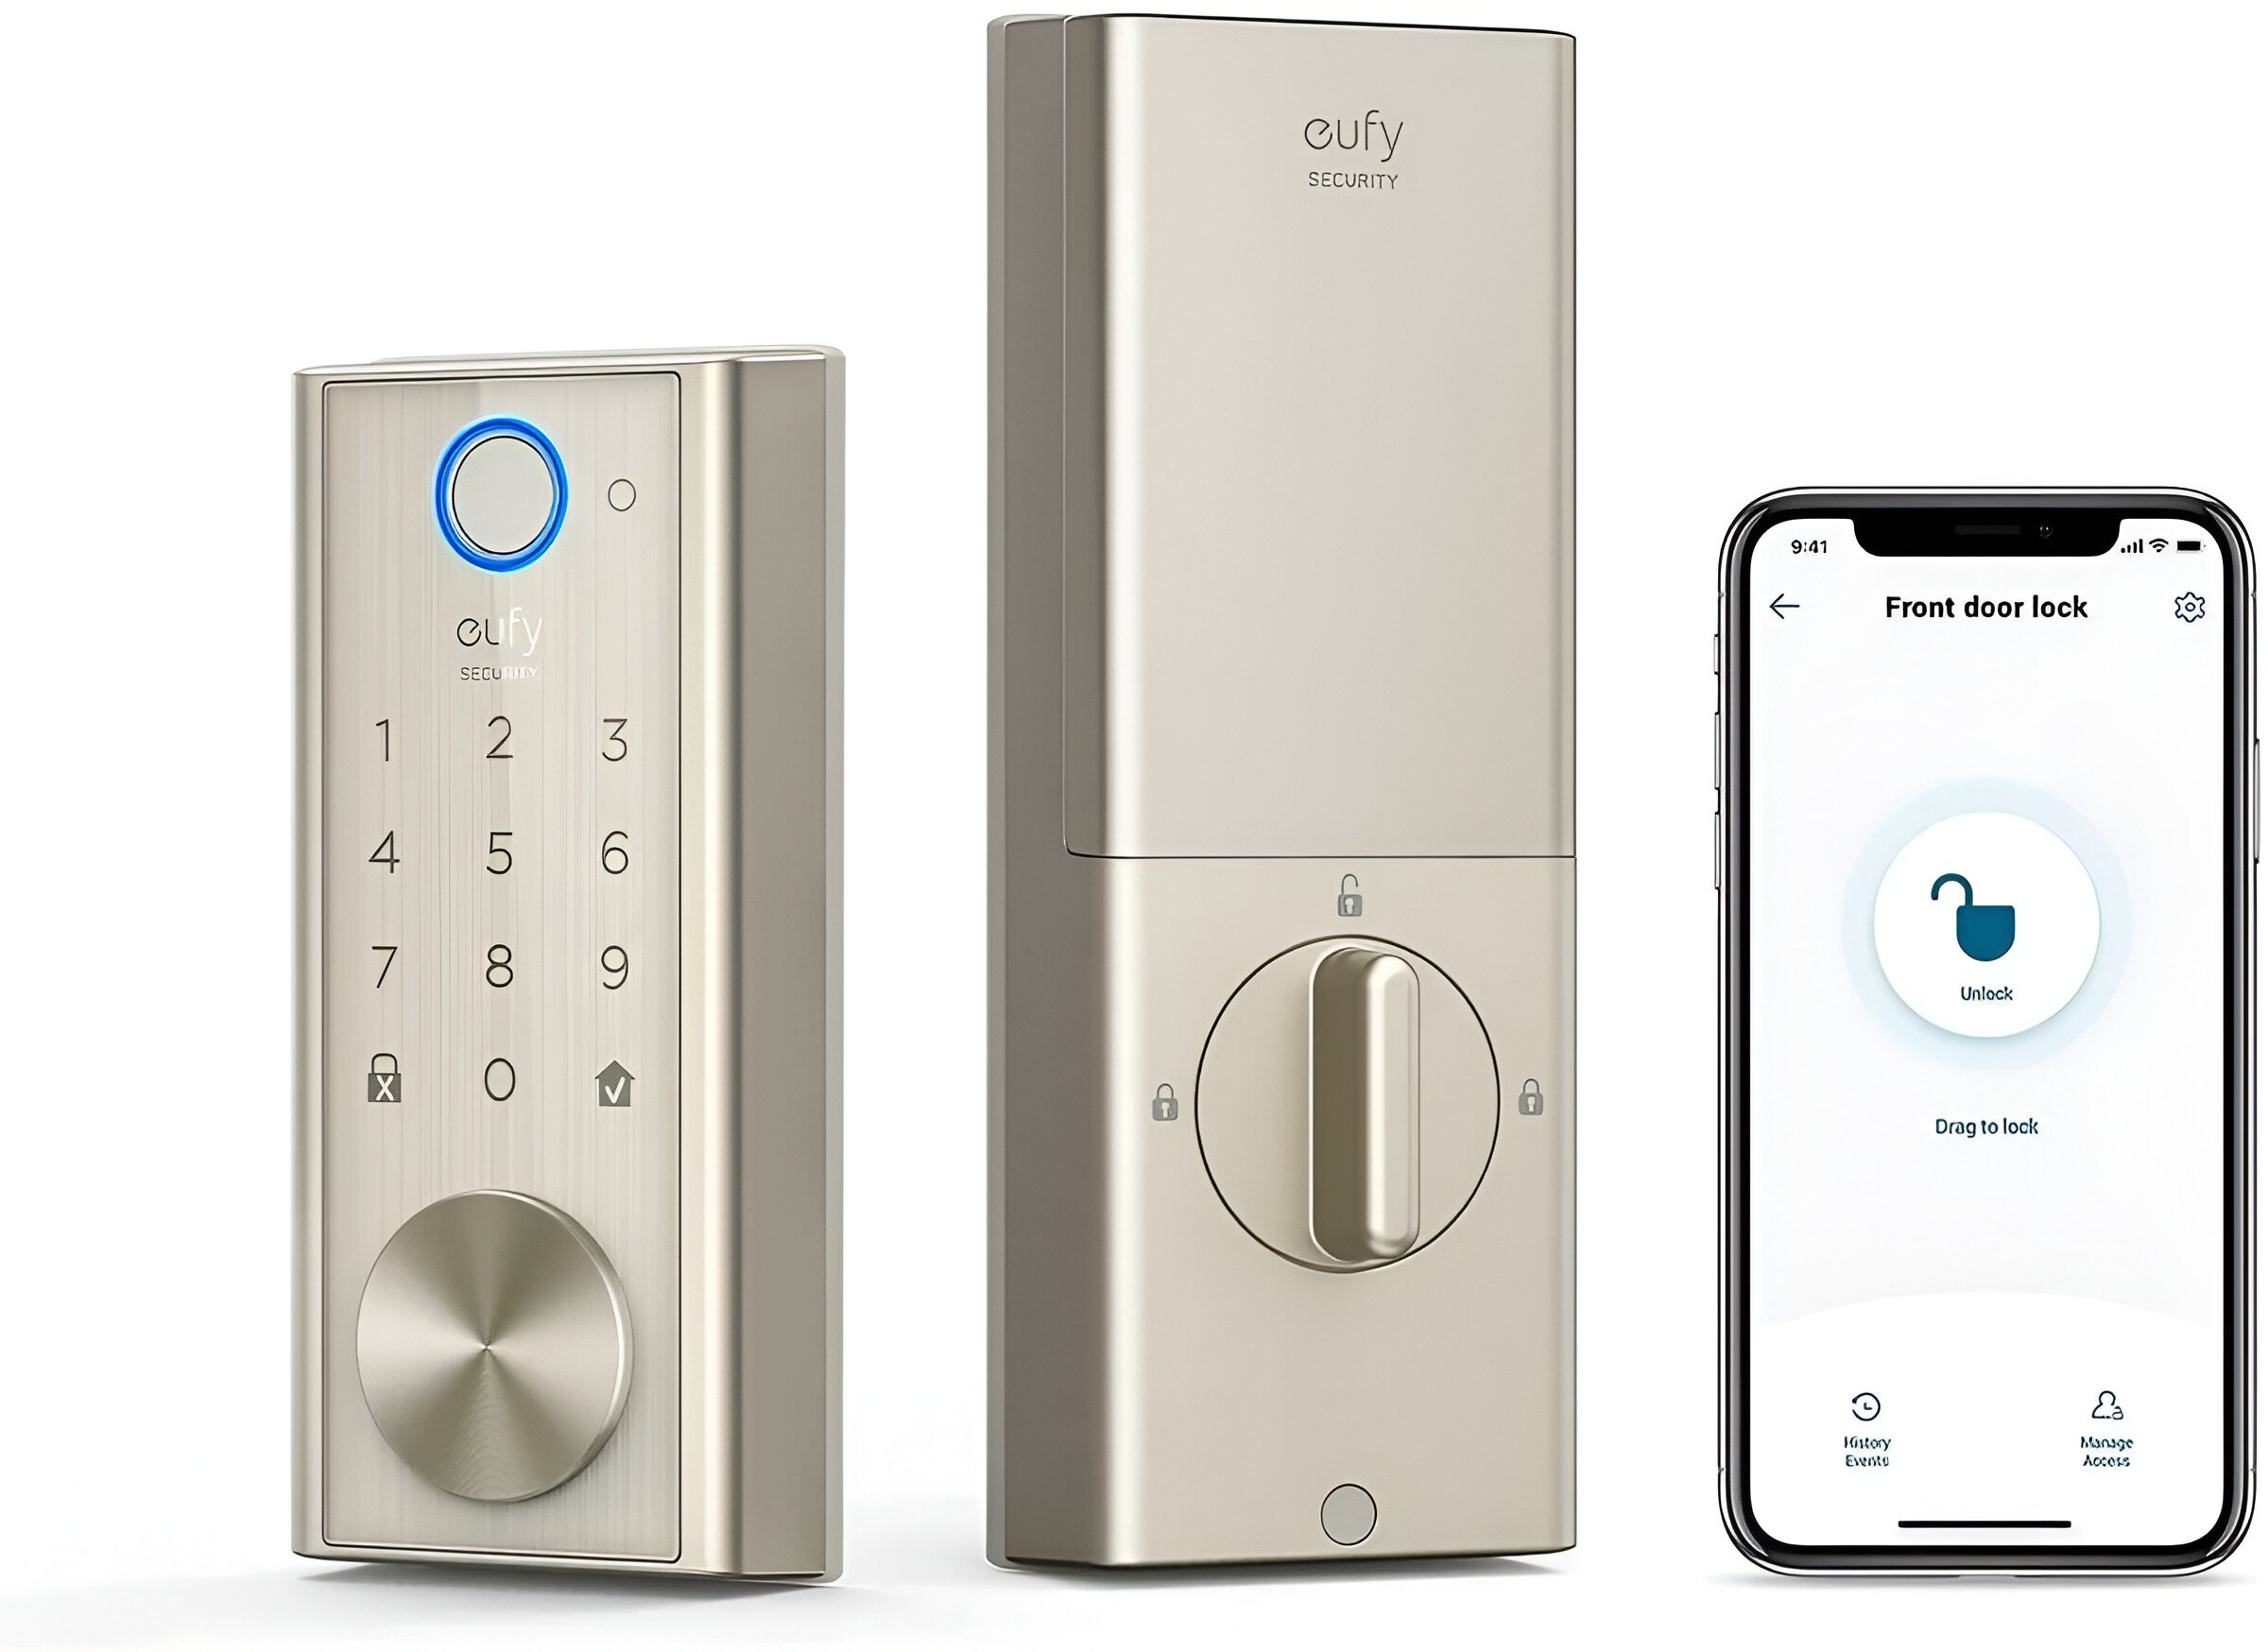 Smart Door Lock With Bluetooth That Automatically Unlocks The Door When Near With A Phone